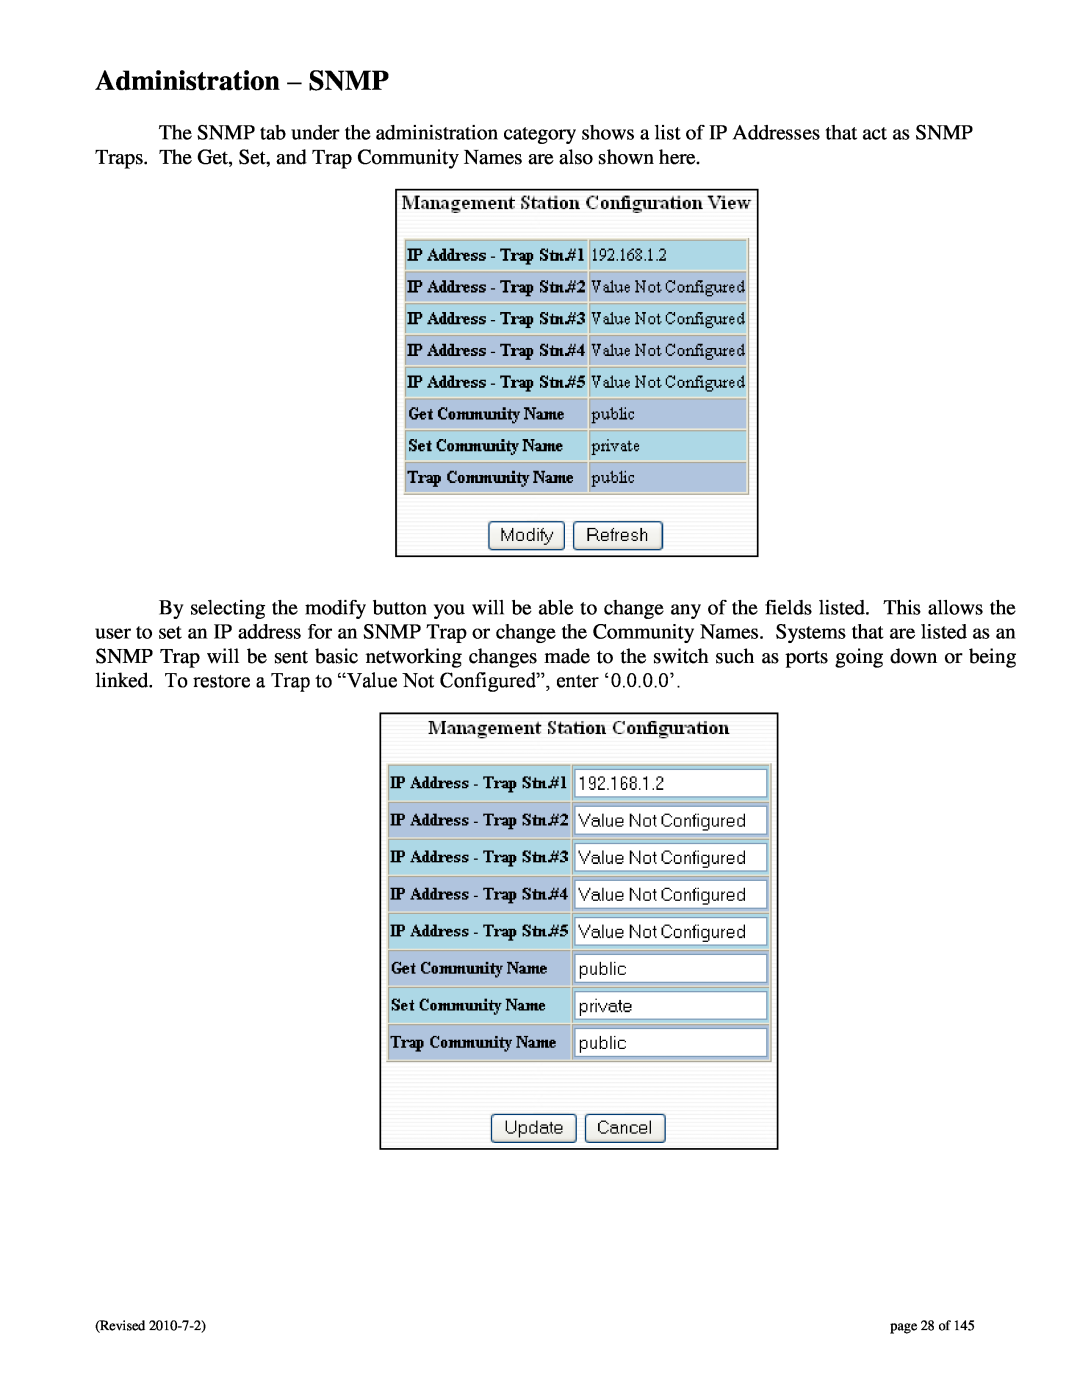 N-Tron 9000 user manual Administration - SNMP, page 28 of 